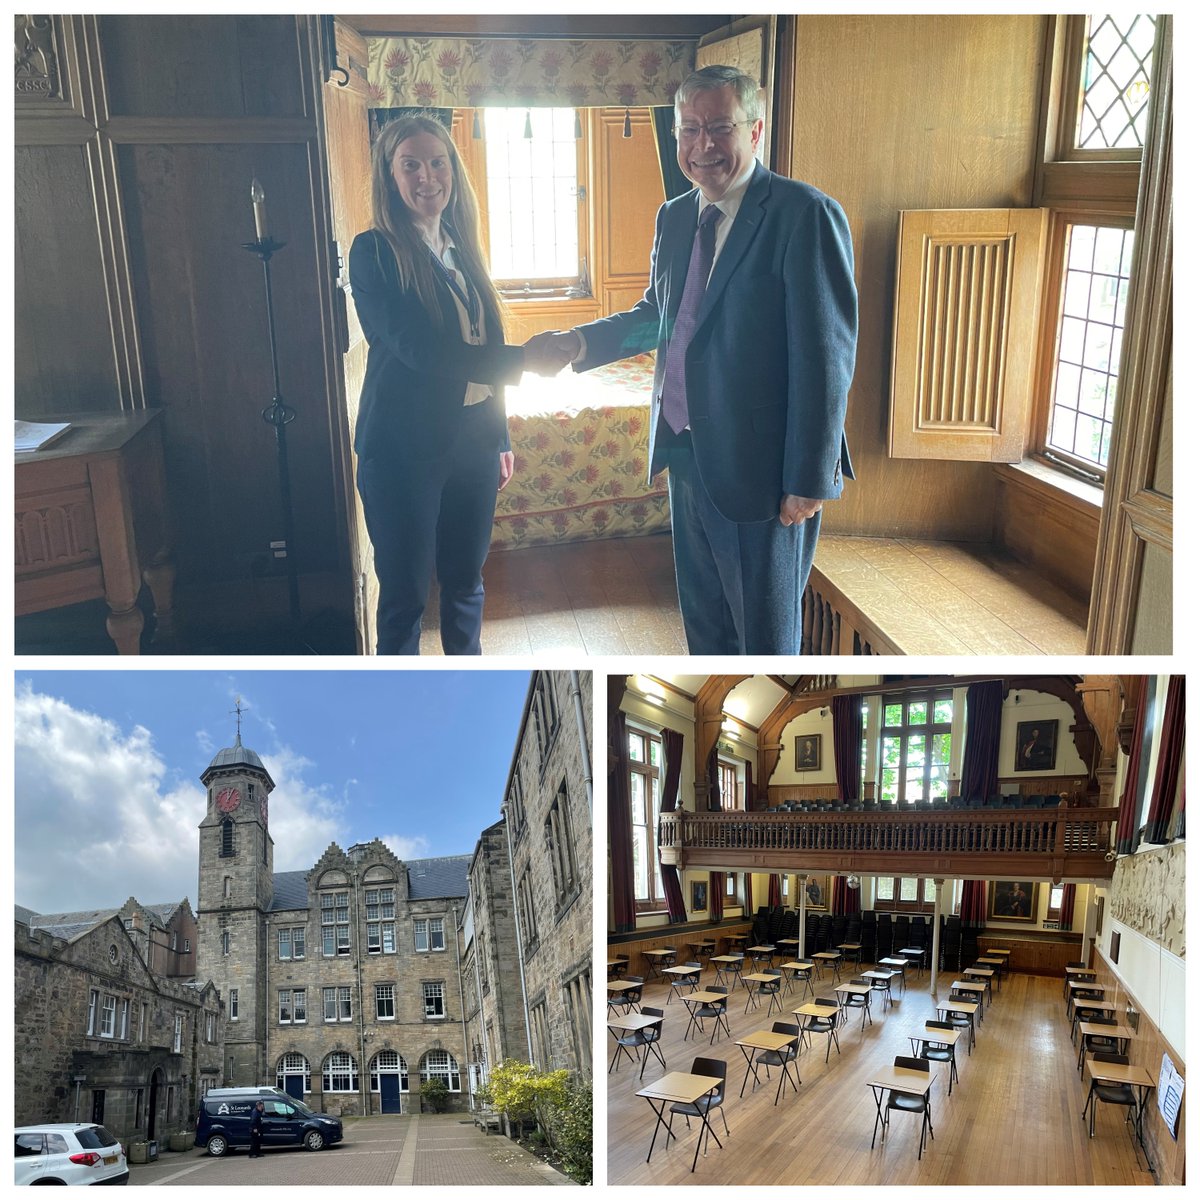 Thanks to Senior Deputy Dawn Pemberton-Hislop for welcoming the @HMC_Org General Secretary to St Leonard’s School in St Andrews. In addition to a fabulous location, the school boasts a bedroom reputedly used by Mary Queen of Scots. @StLeonards_Head